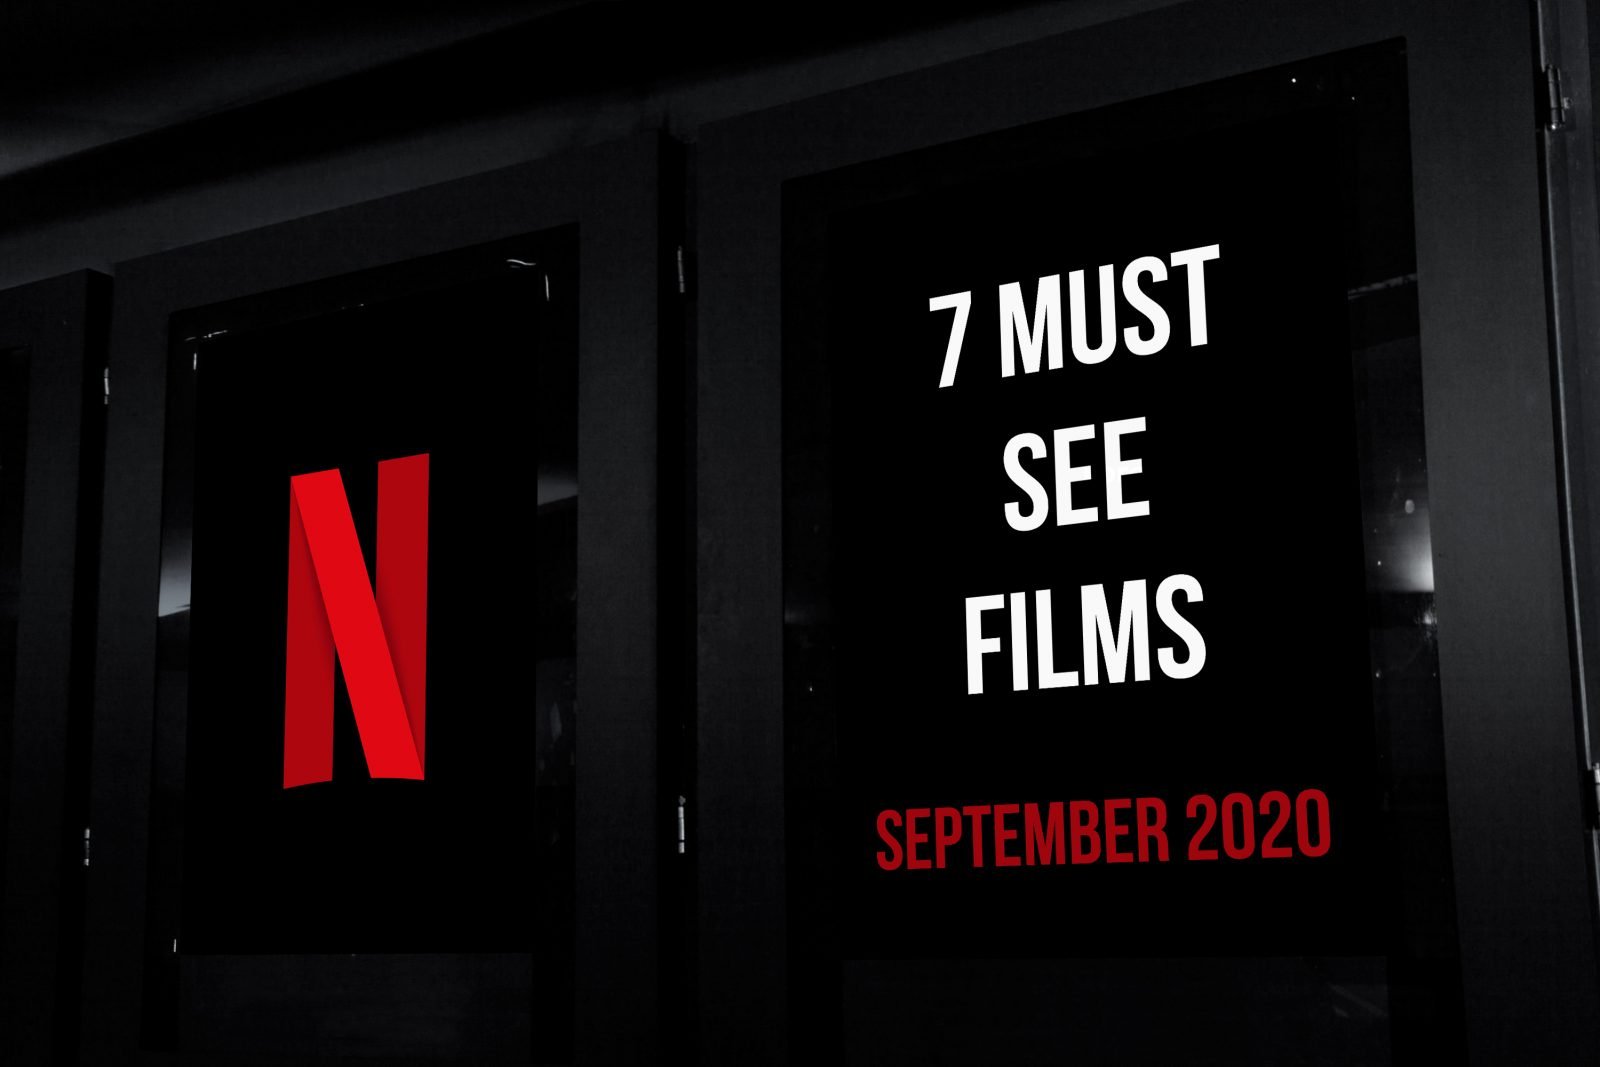 7 Must See Films on Netflix in September 2020